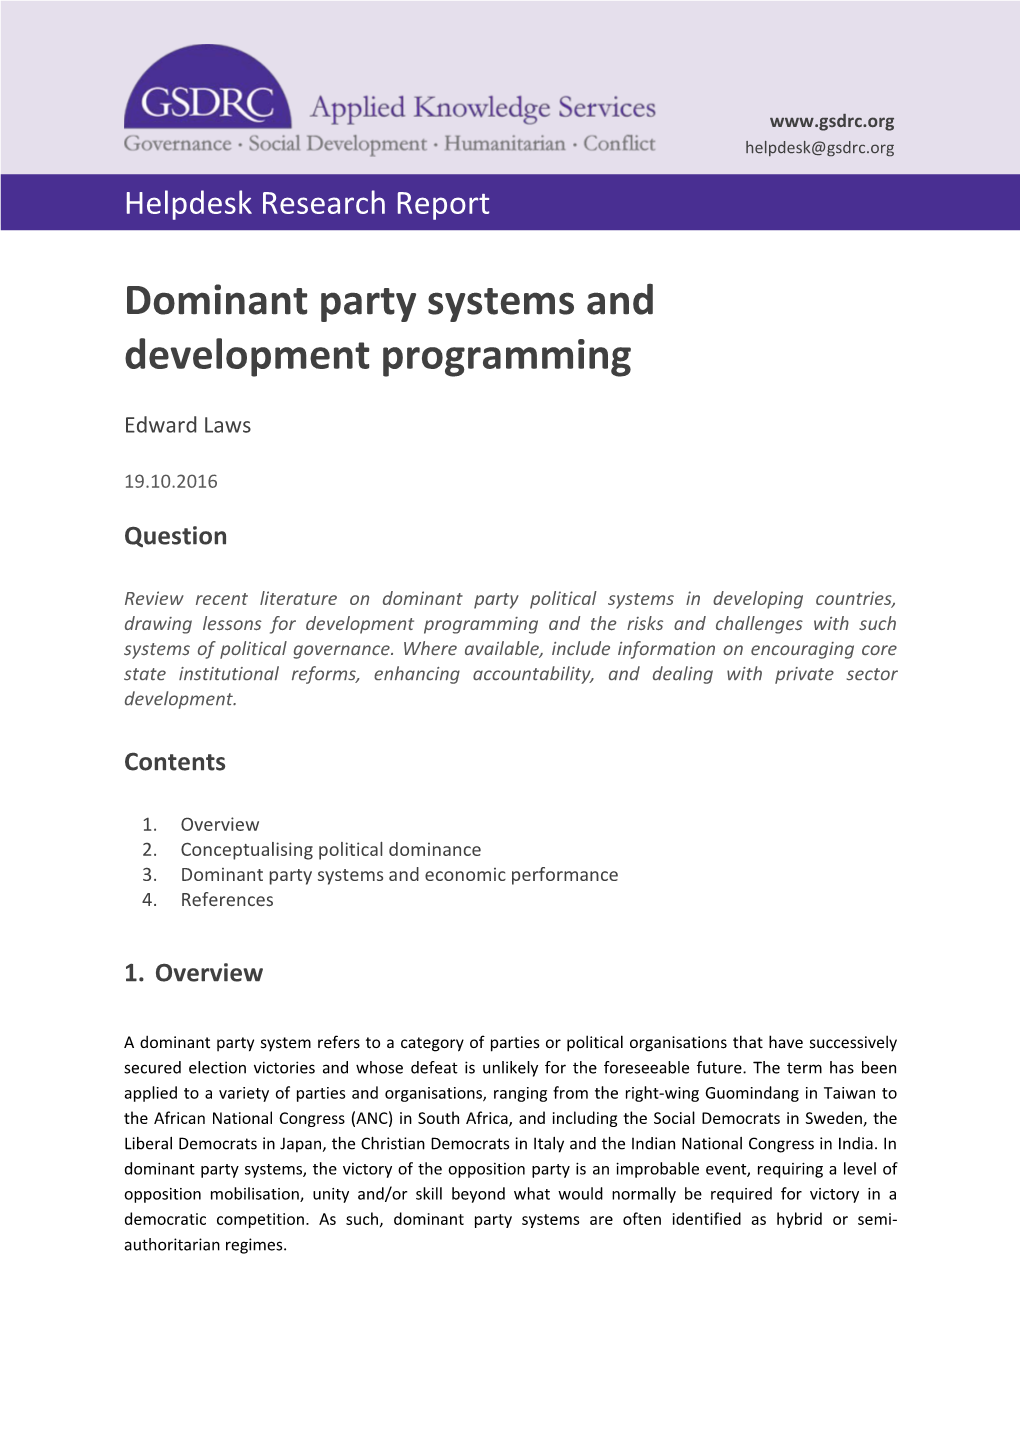 Dominant Party Systems and Development Programming